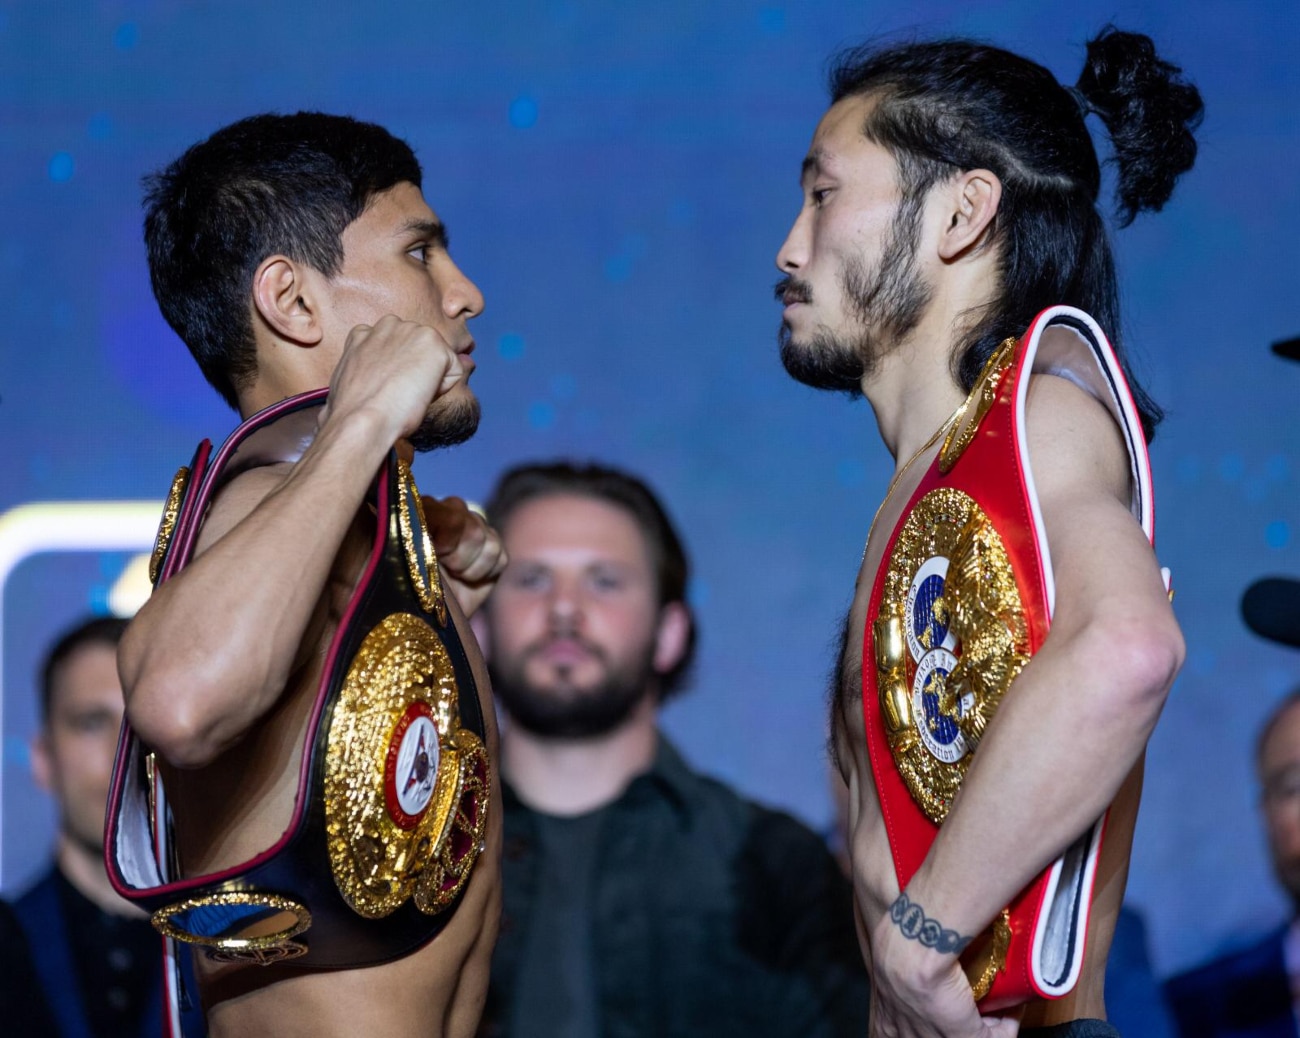 Akhmadaliev vs. Iwasa - live action results, how to watch